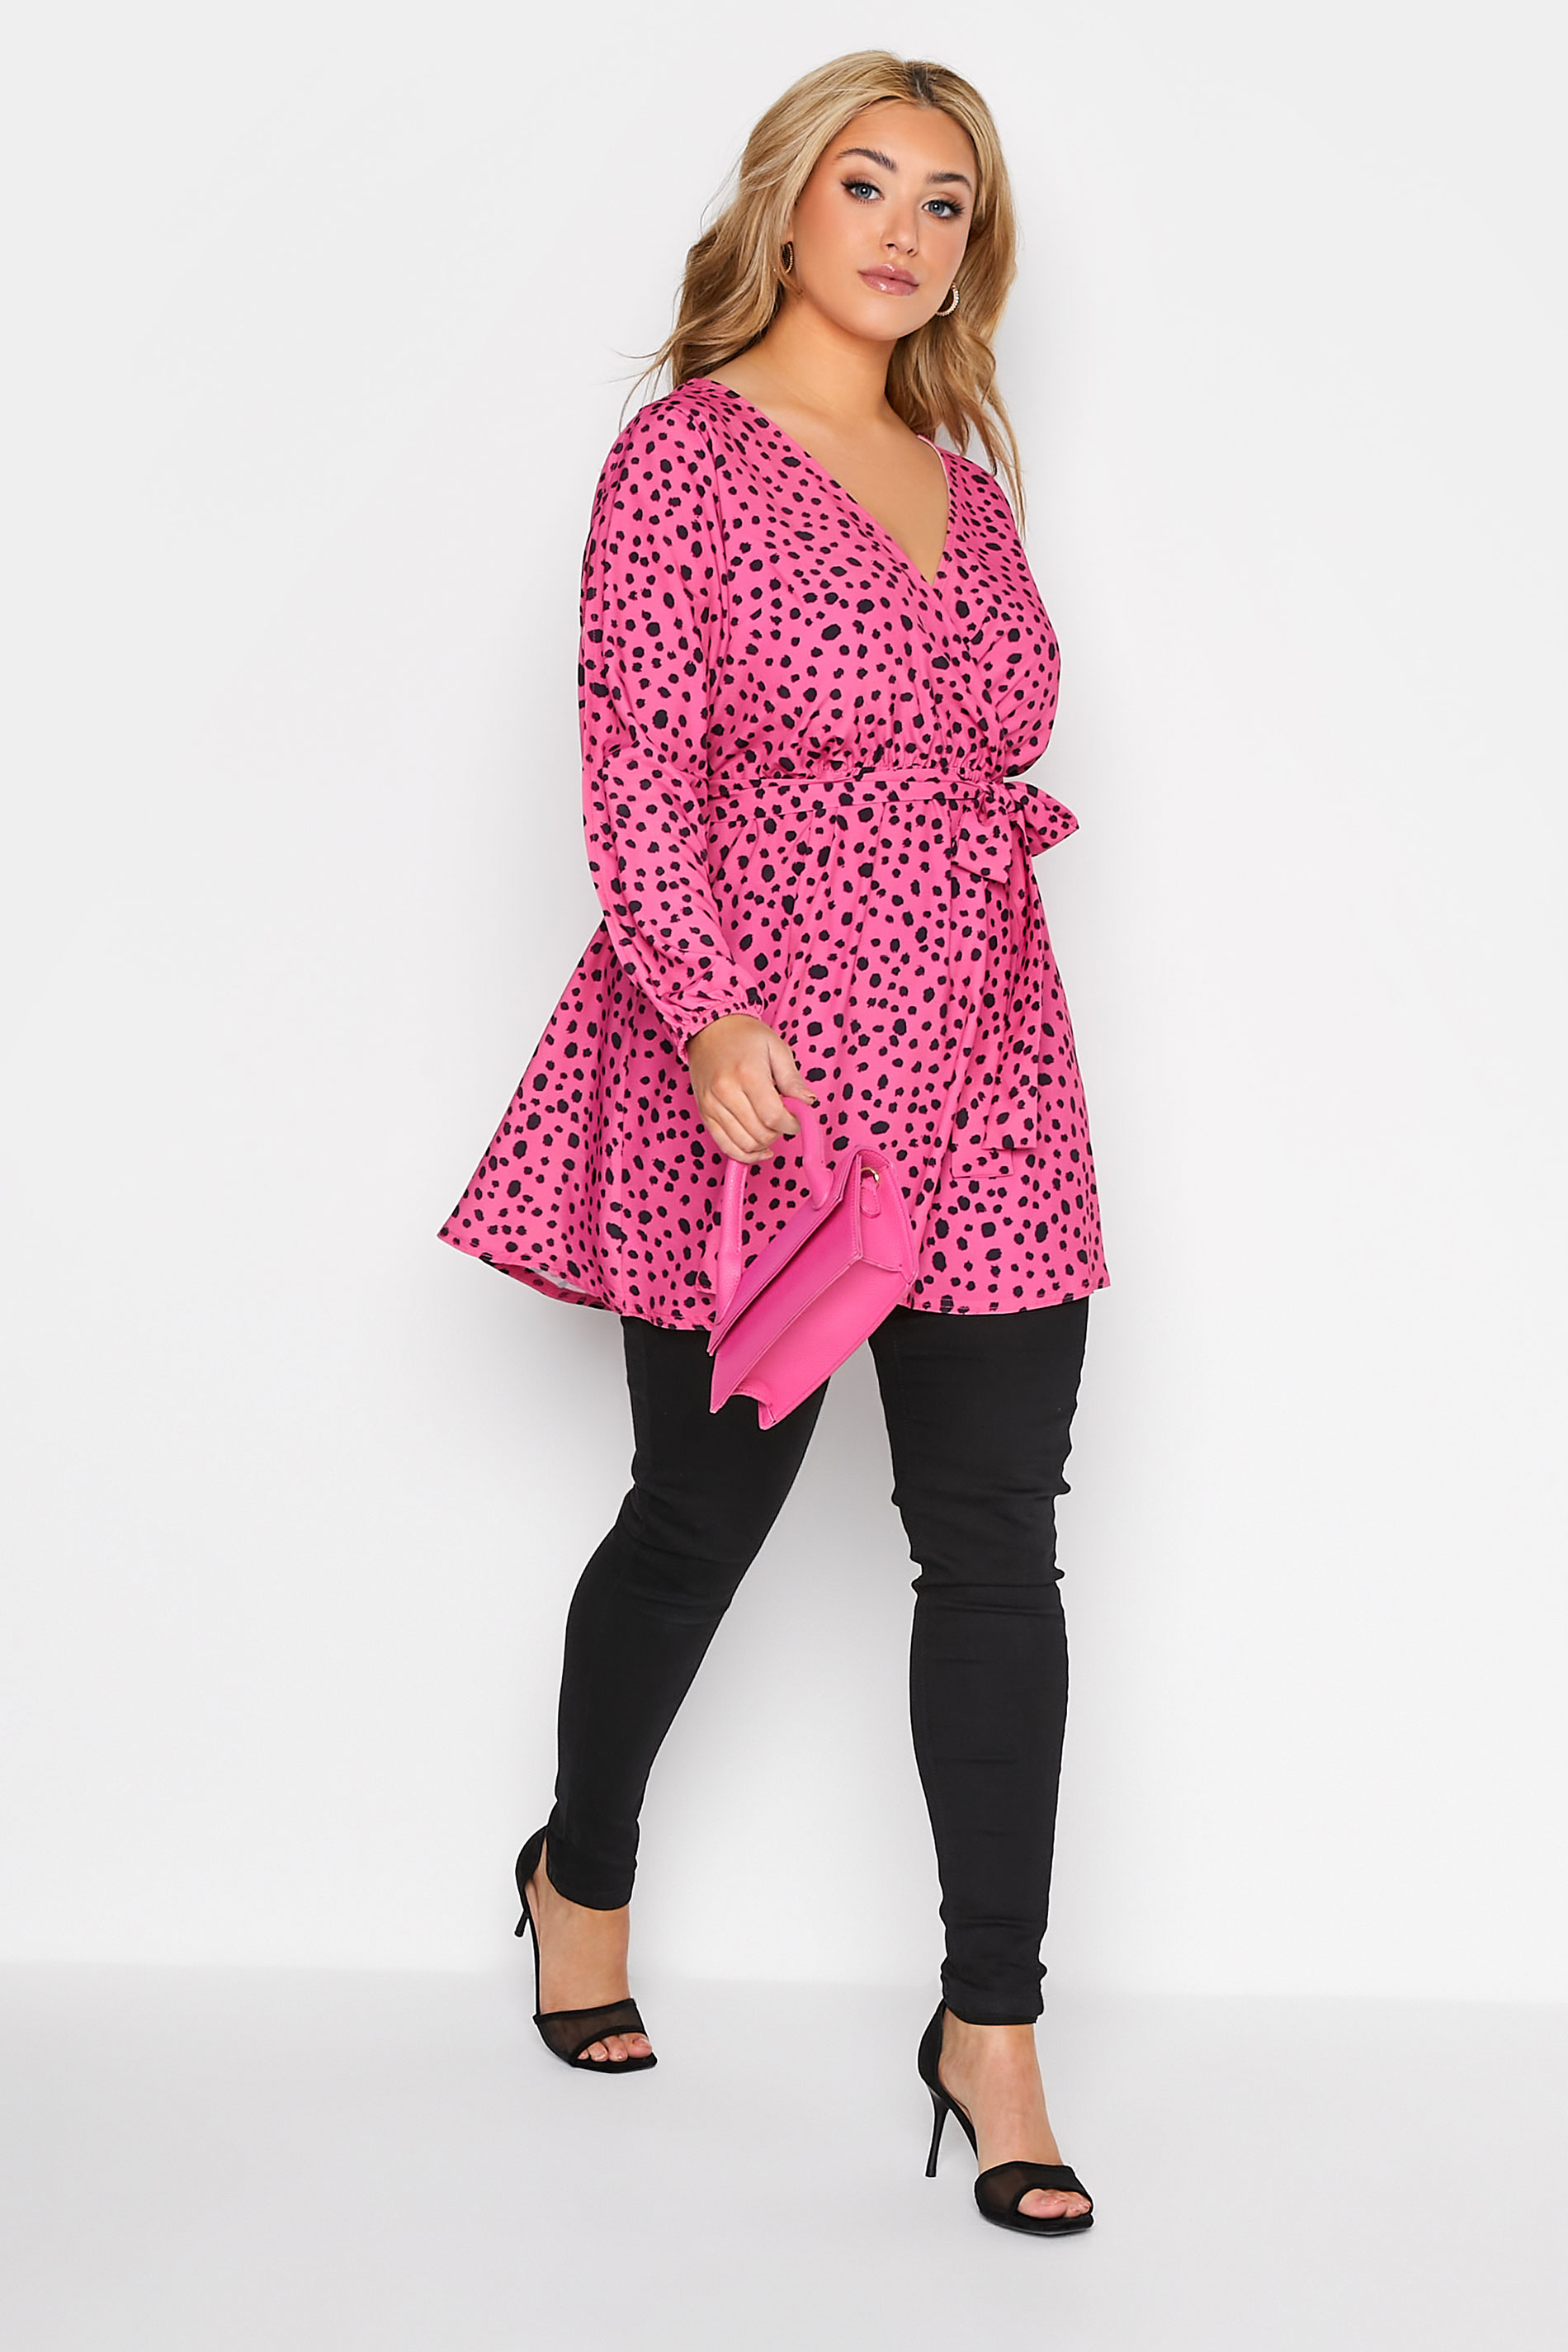 YOURS LONDON Plus Size Bright Pink Dalmatian Print Split Sleeve Wrap Top | Yours Clothing 2